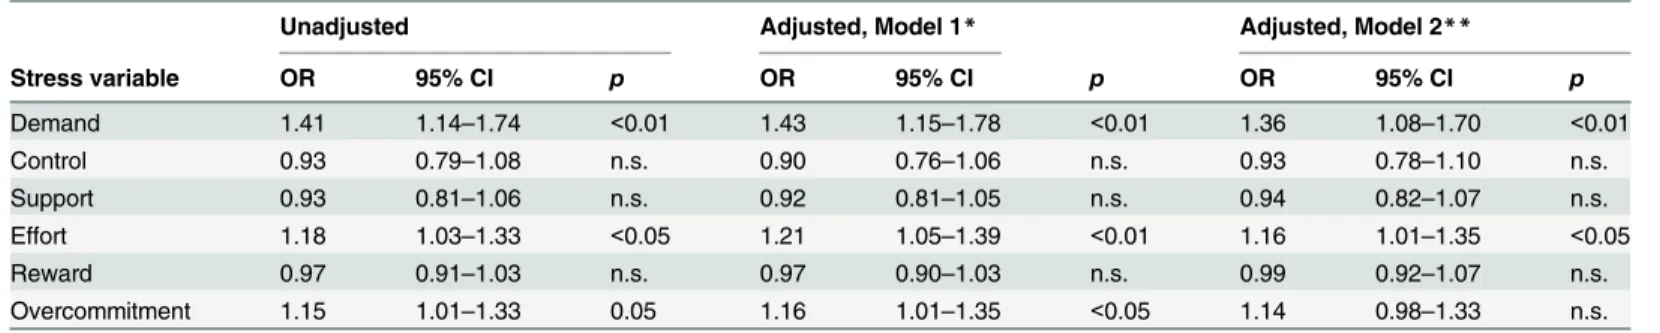 Table 4. Association of stress variables with incident cases of metabolic syndrome.